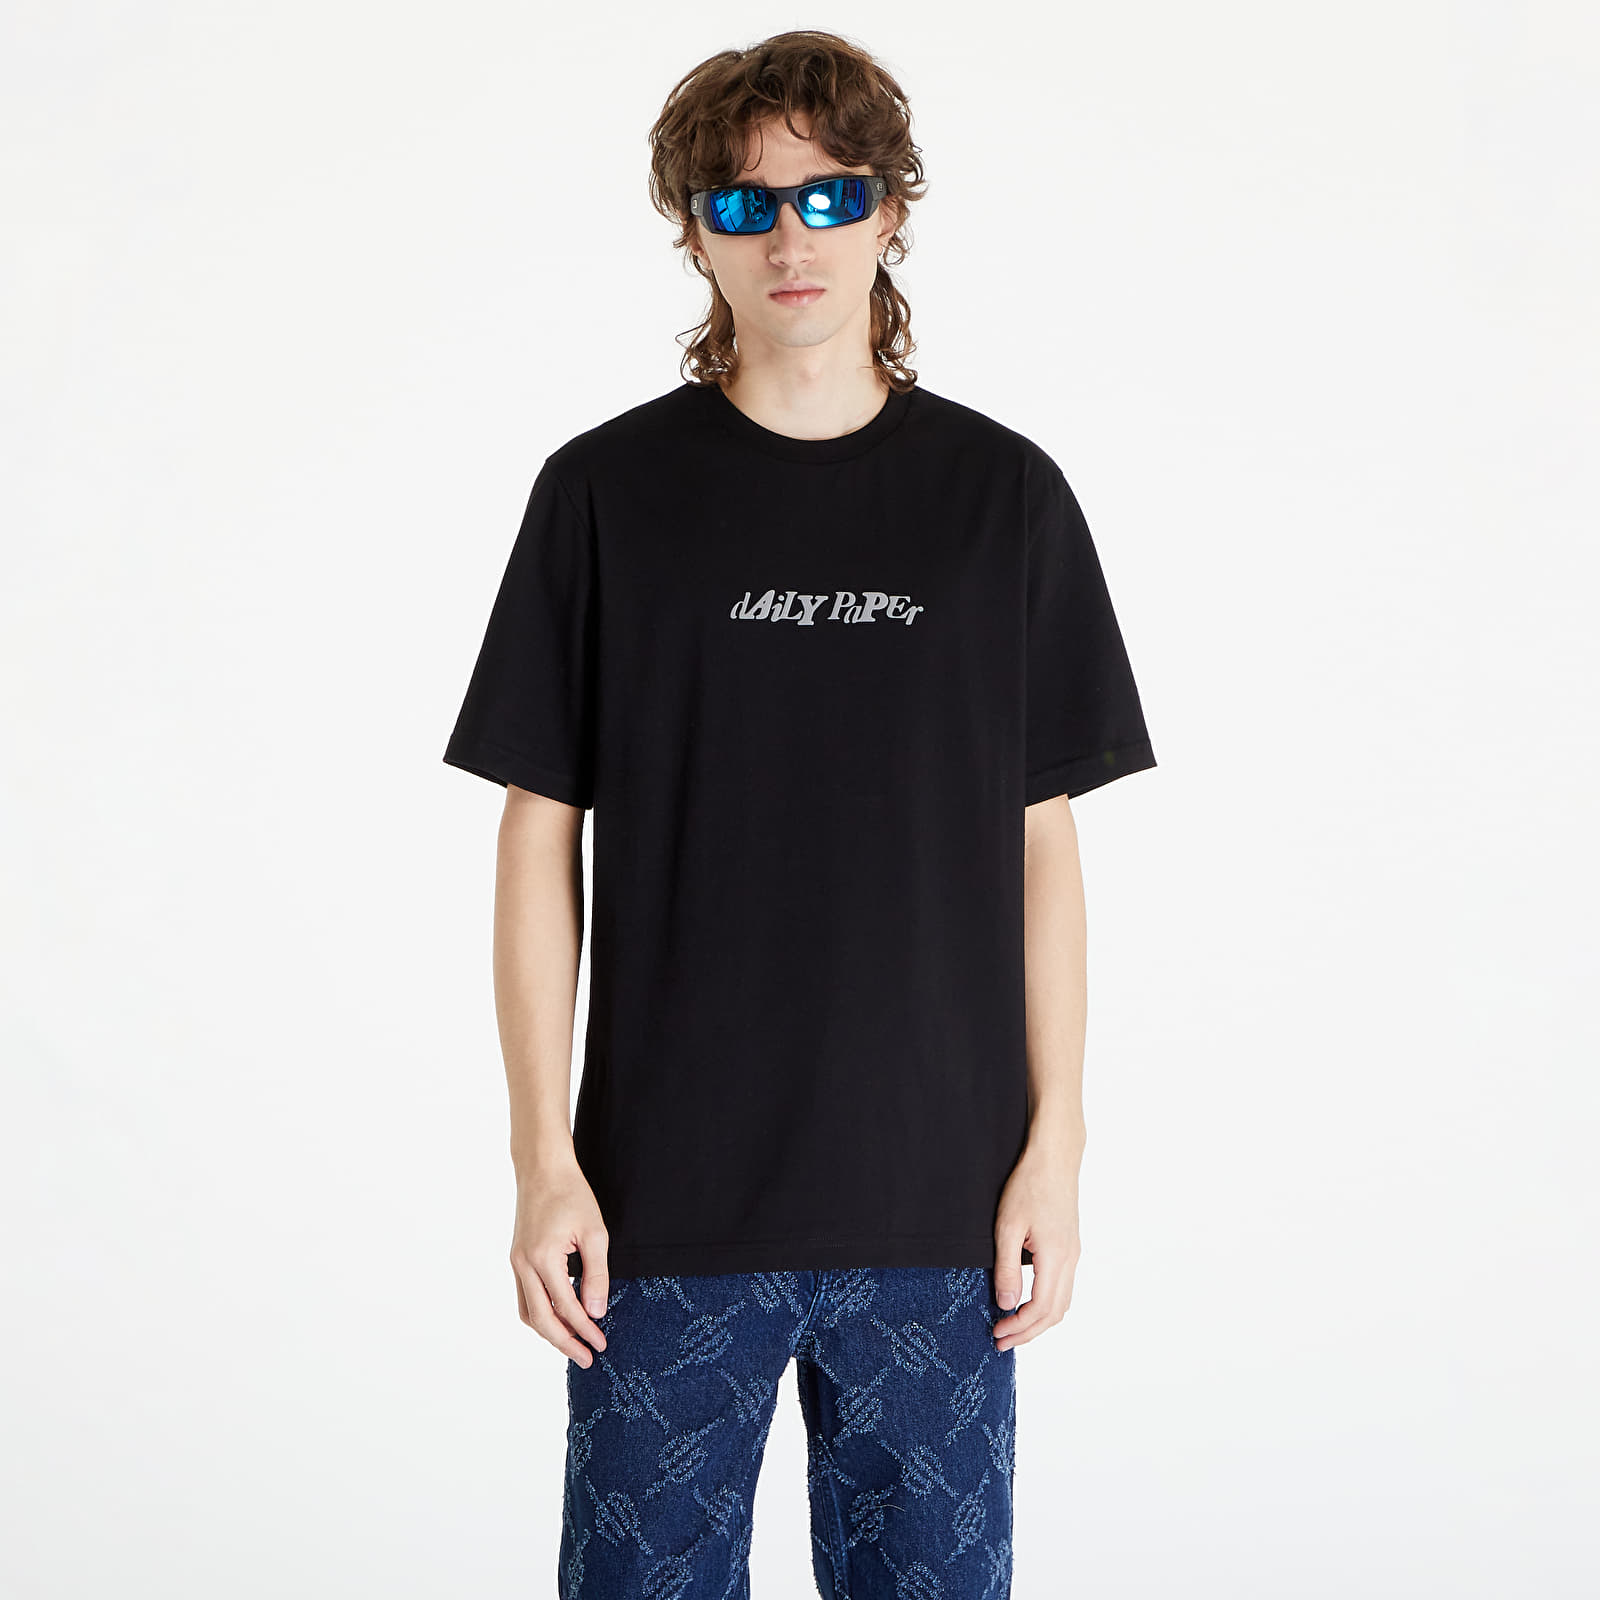 Daily Paper Unified Type Short Sleeve T-Shirt Black